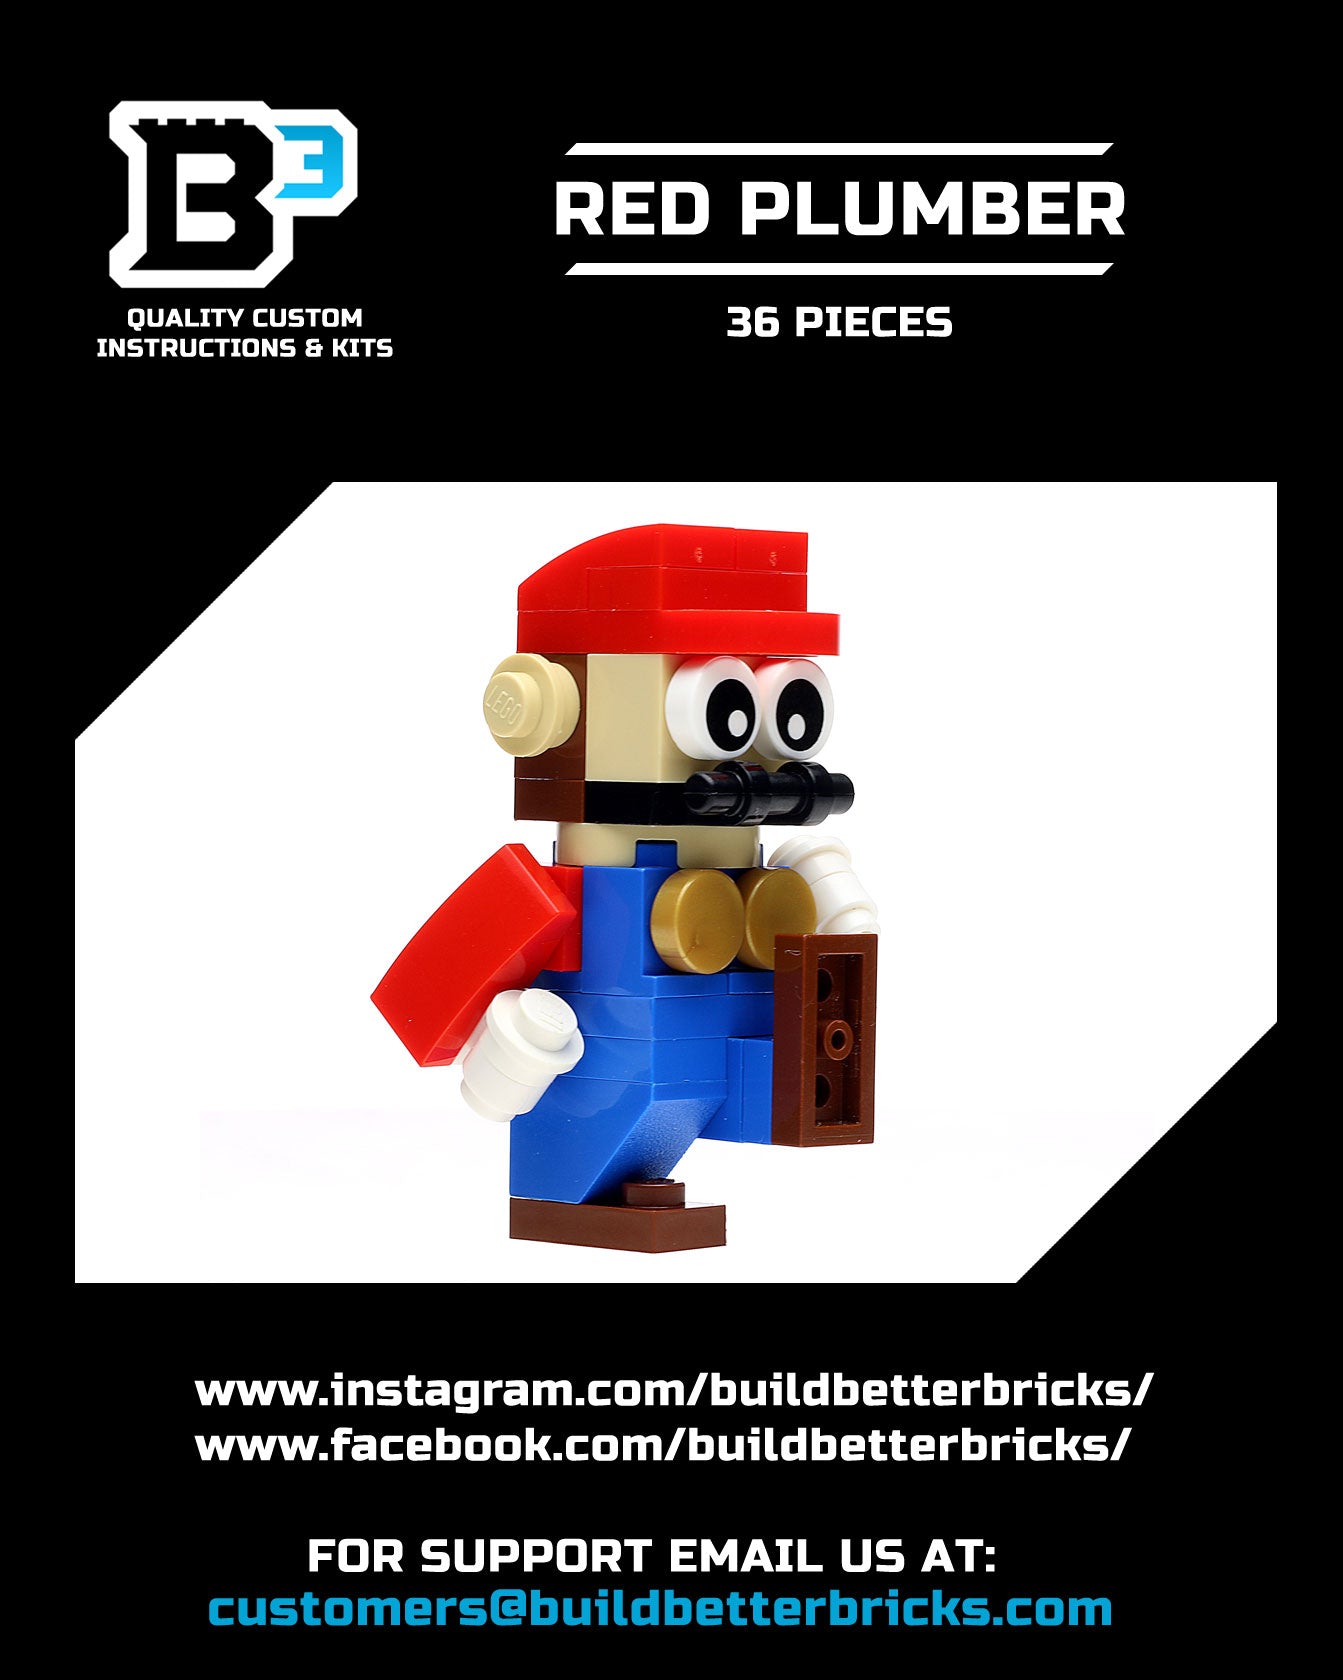 The Red Plumber